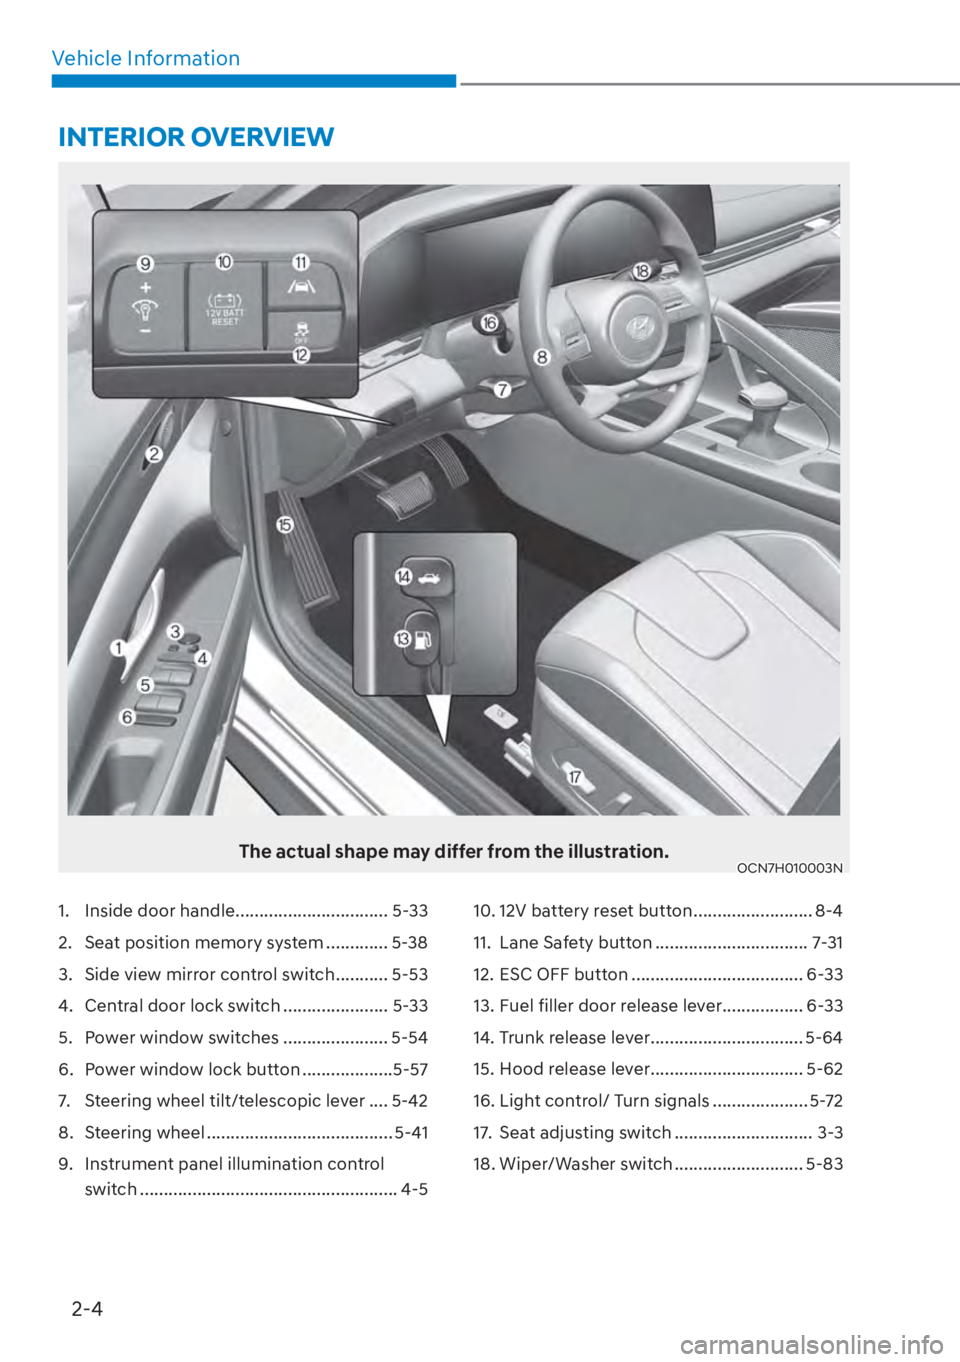 HYUNDAI ELANTRA HYBRID 2023  Owners Manual 2-4
Vehicle Information
The actual shape may differ from the illustration.OCN7H010003N
1.  Inside door handle ................................ 5-33
2.  Seat position memory system ............. 5-38
3